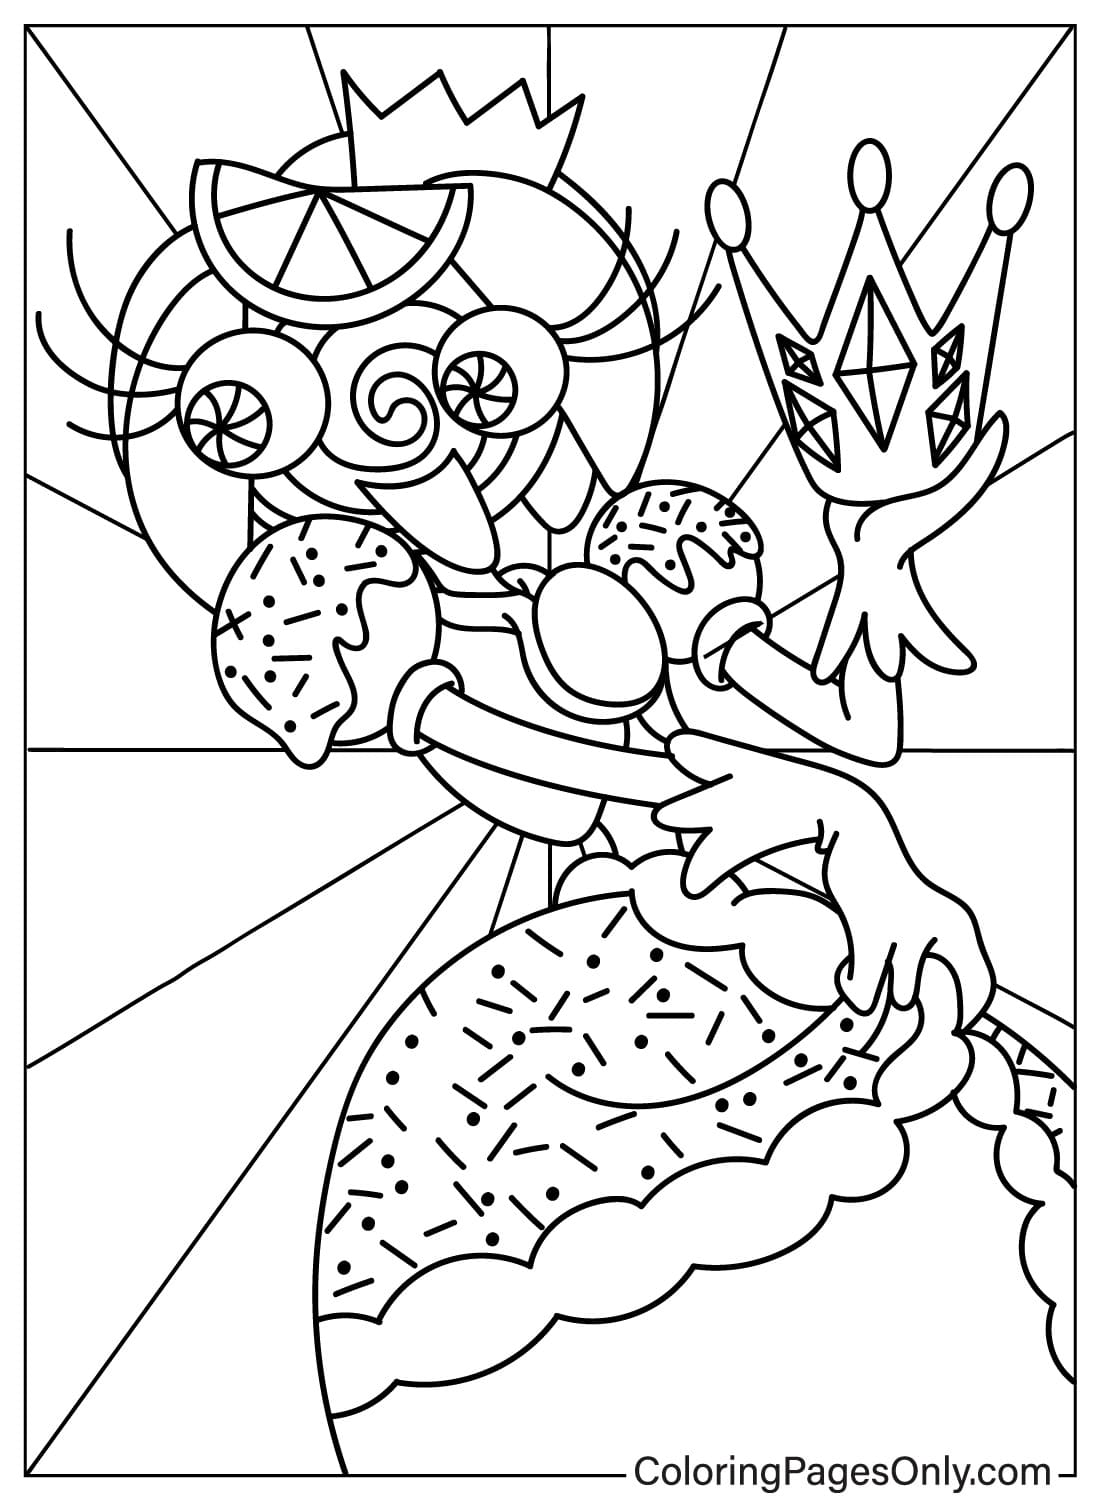 Princess Loolilalu with Crown Coloring Page for Kids from Princess Loolilalu